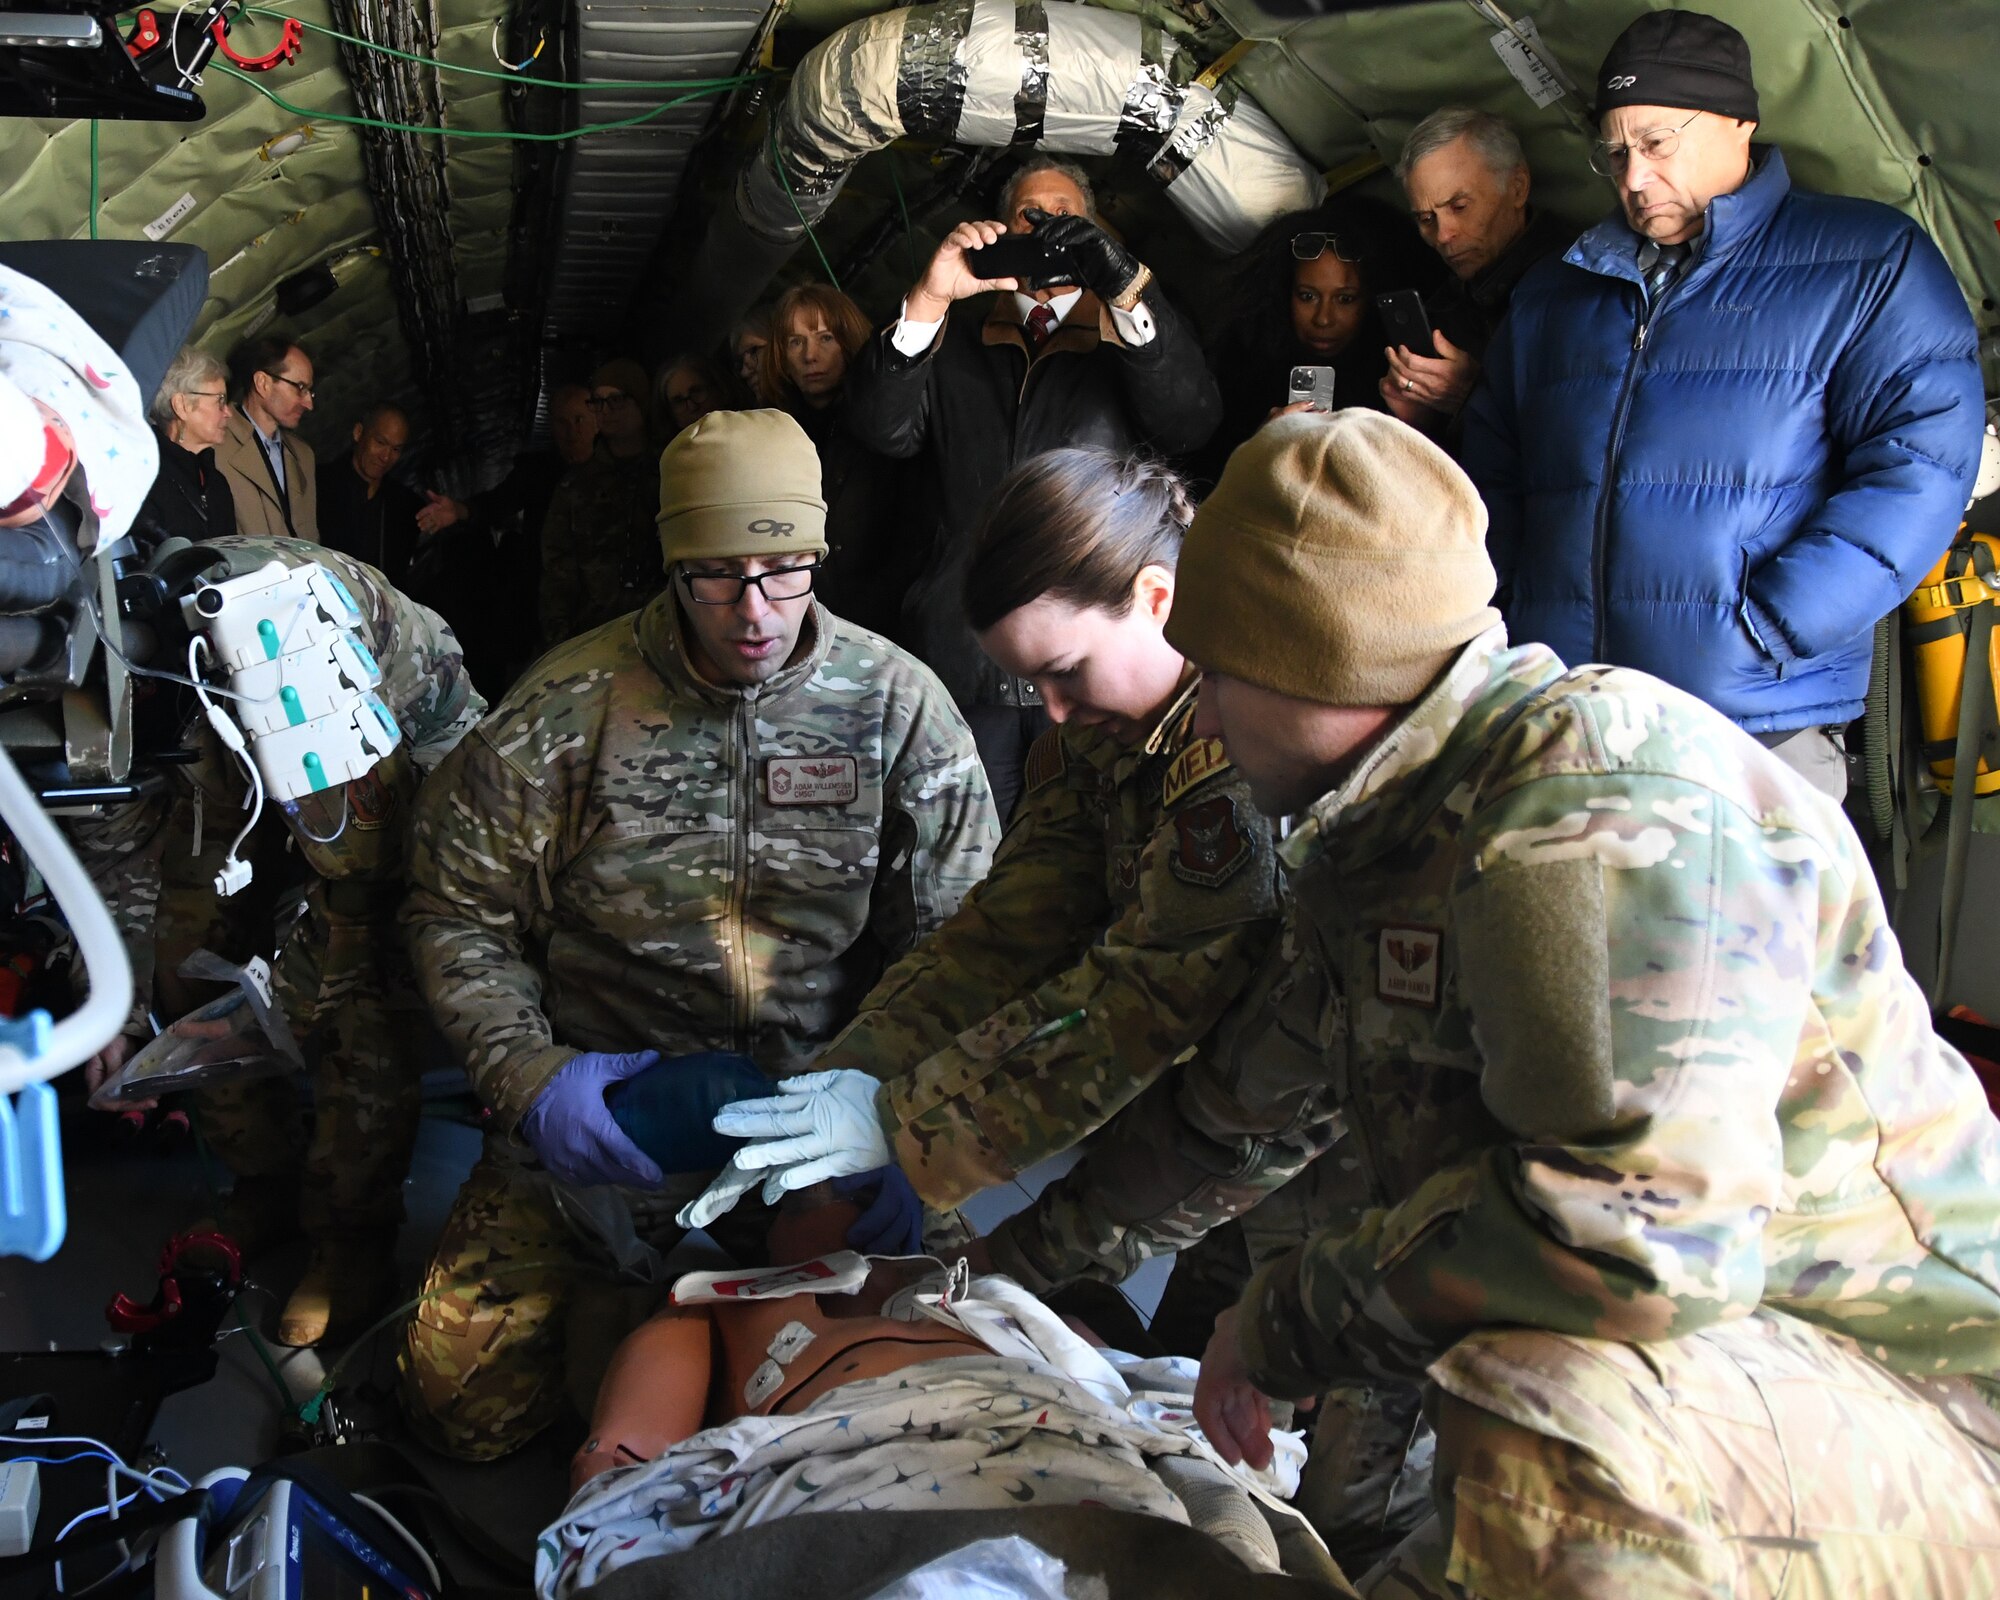 Chief Master Sgt. Adam, Willemssen, Tech Sgt. Rebecca Gollihugh, and Maj. Aaron Rankin, all of the 459th Aeromedical Evacuation Squadron, conduct medical training in front of members of the Defense Health Board during the board’s visit to the 459th ARW on Dec. 1, 2022. The training took place aboard one of the wing’s KC-135 Stratotankers. The DHB requested a visit to Joint Base Andrews for an opportunity to see the pivotal role medical units at Joint Base Andrews play in the global patient movement pipeline and the challenges faced in supporting this critical effort. (U.S. Air Force Photo by Maj. Tim Smith)